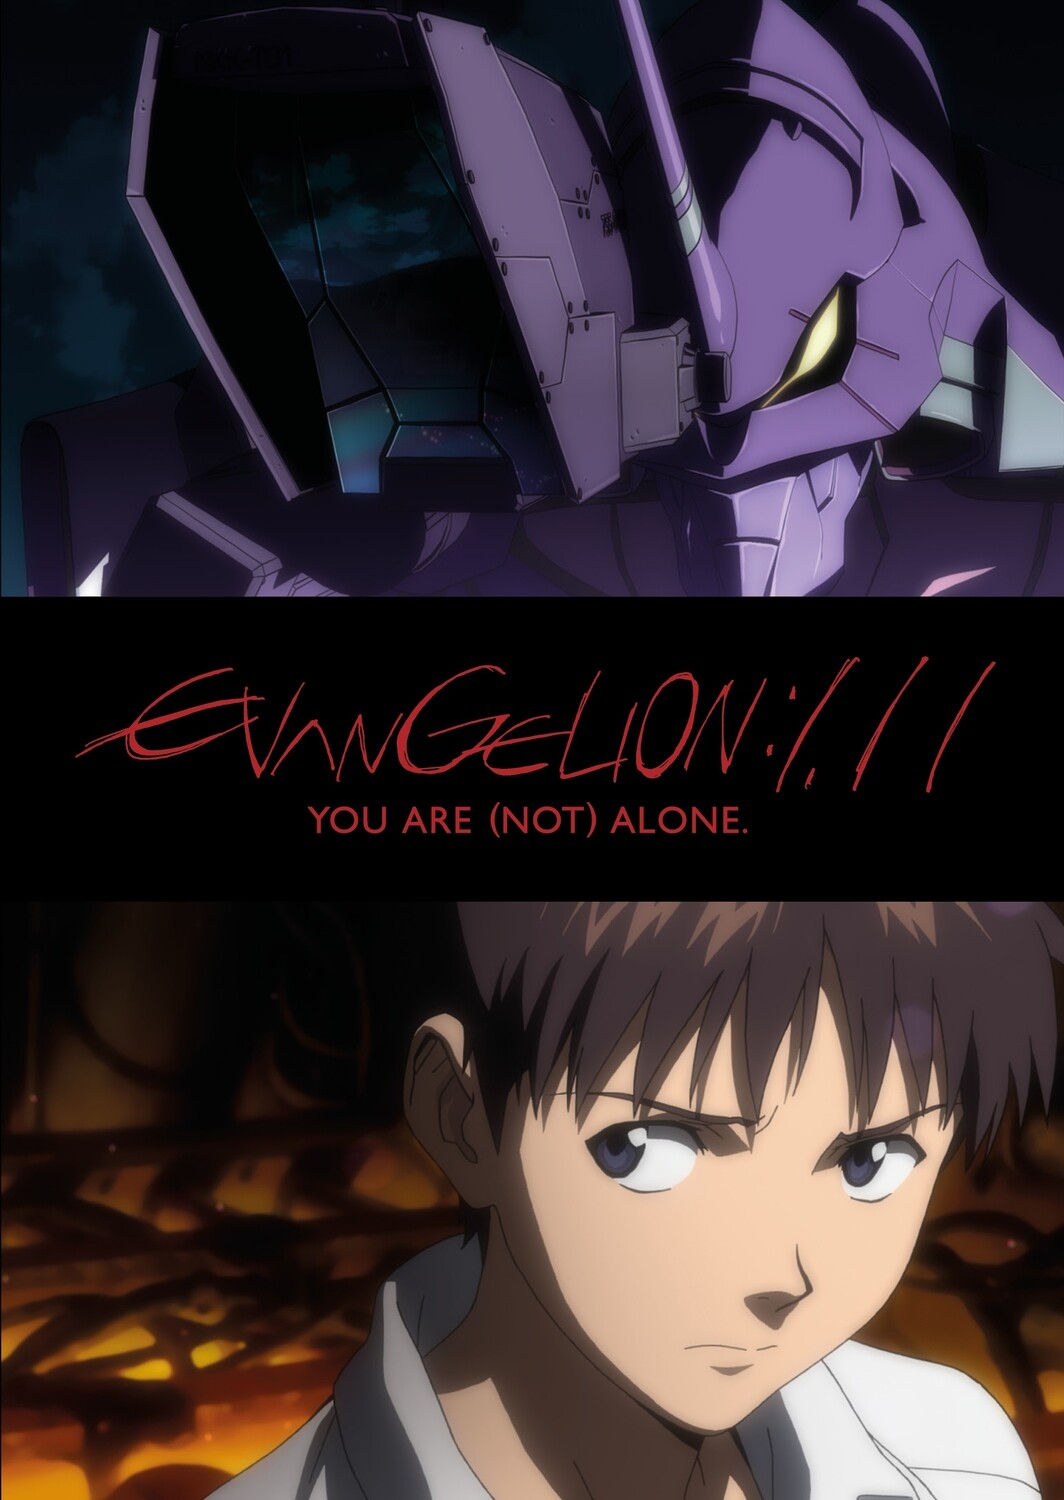 Evangelion 1.11 - You Are (Not) Alone